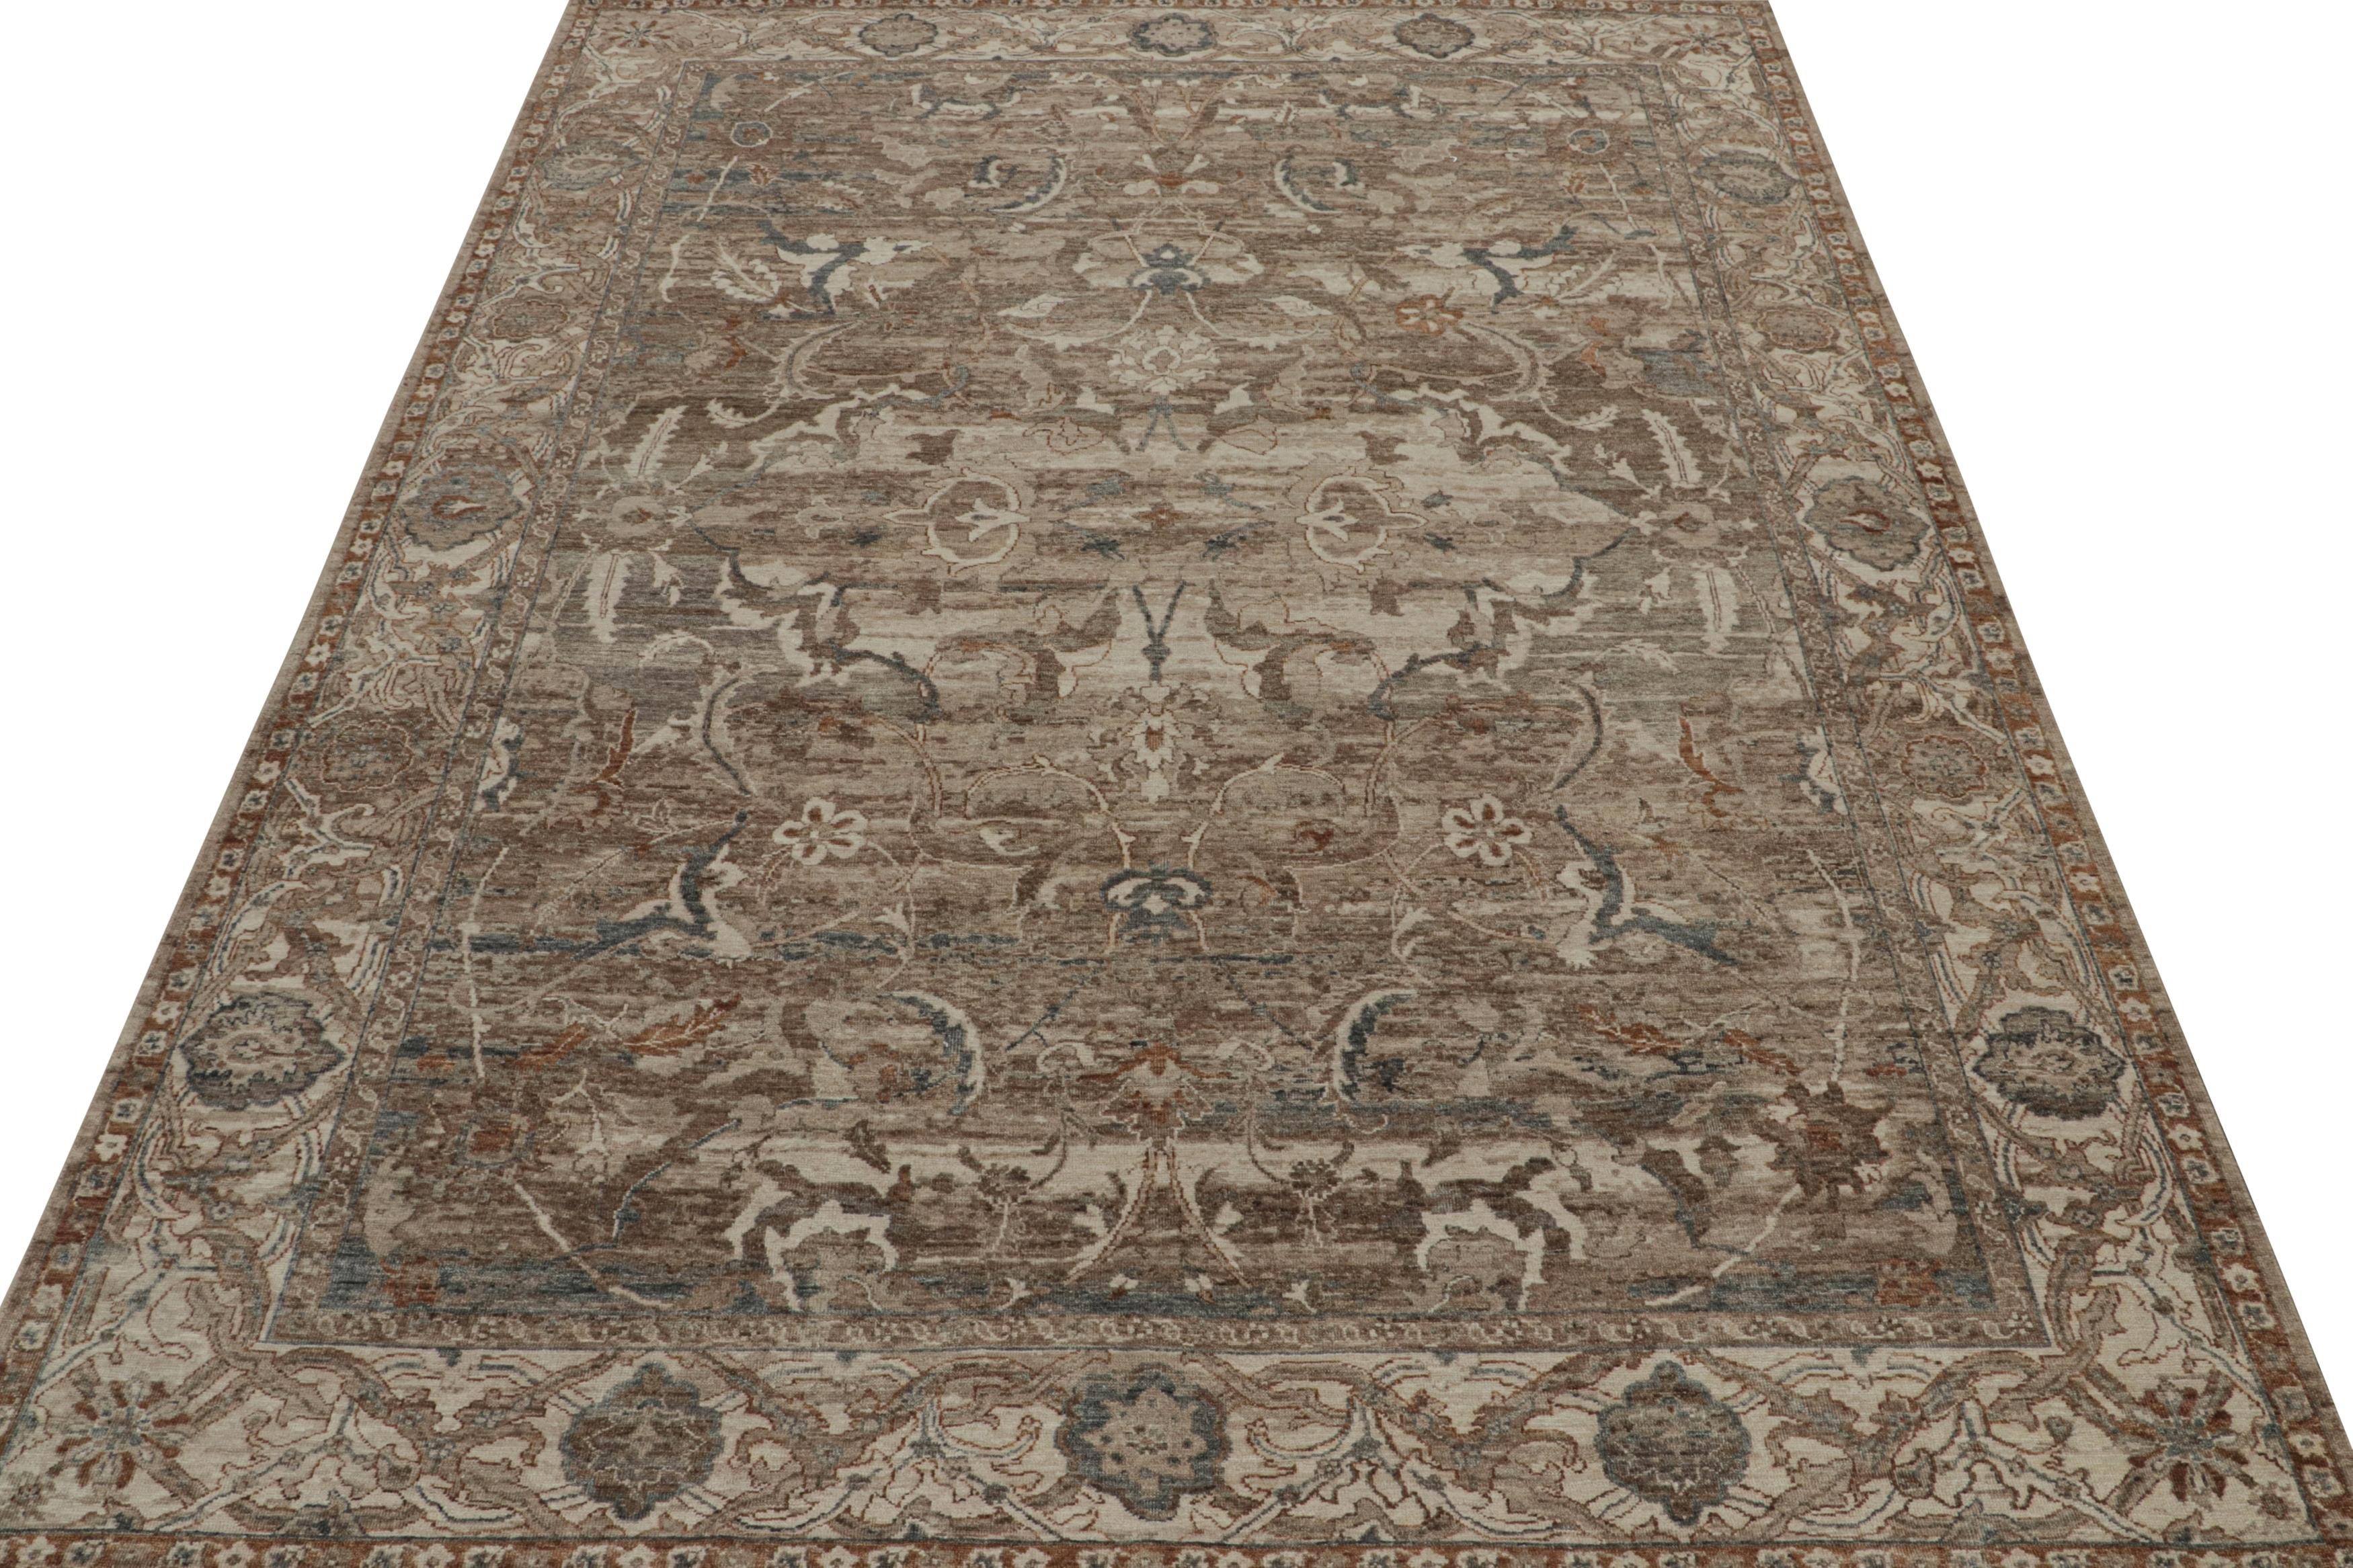 Turkish Rug & Kilim’s Modern Classics Rug with Beige-Brown and Navy Blue Floral Patterns For Sale